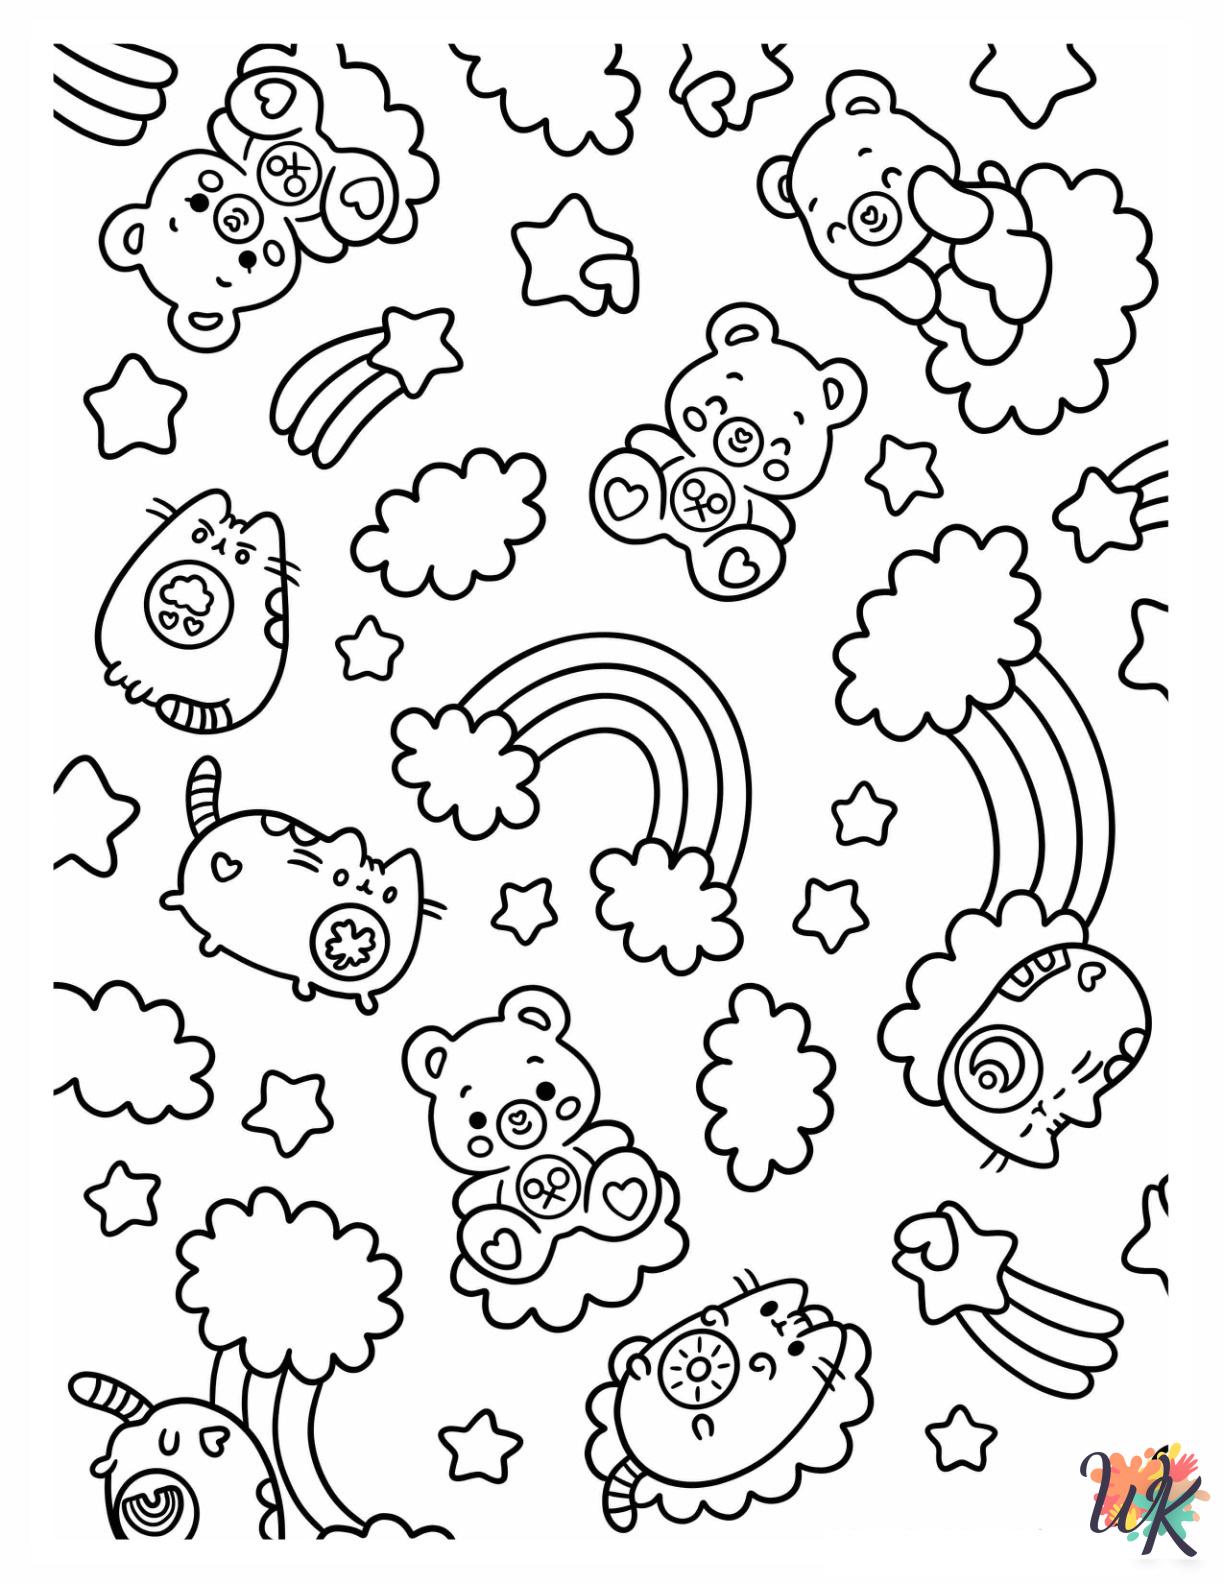 Aesthetic printable coloring pages